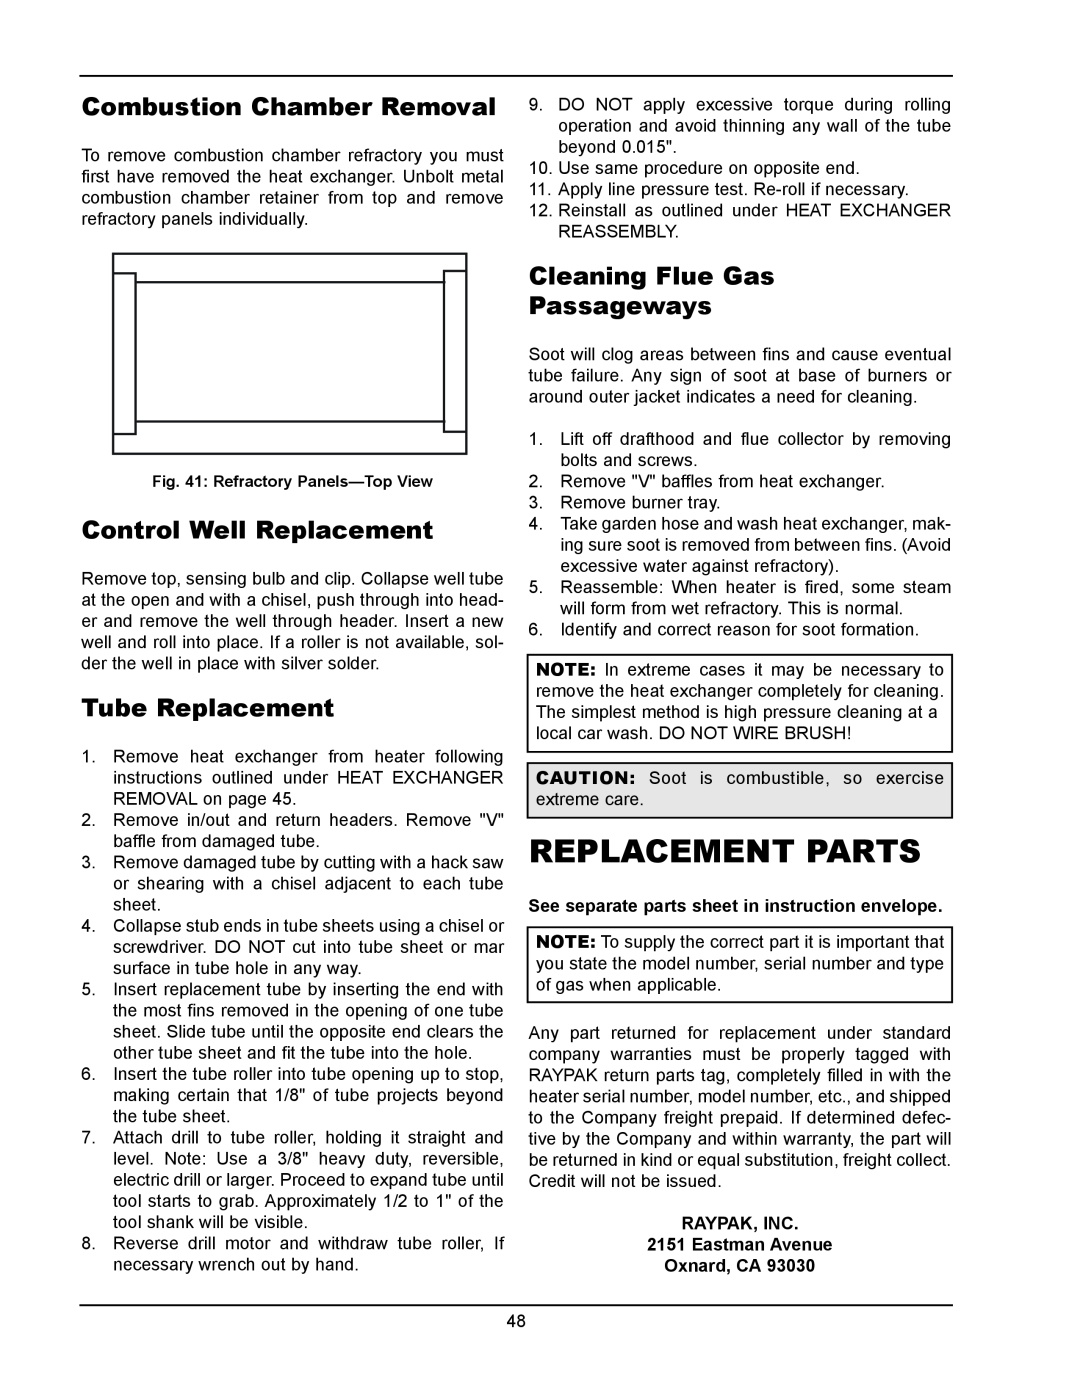 Raypak 1334001 Replacement Parts, Combustion Chamber Removal, Control Well Replacement, Tube Replacement 